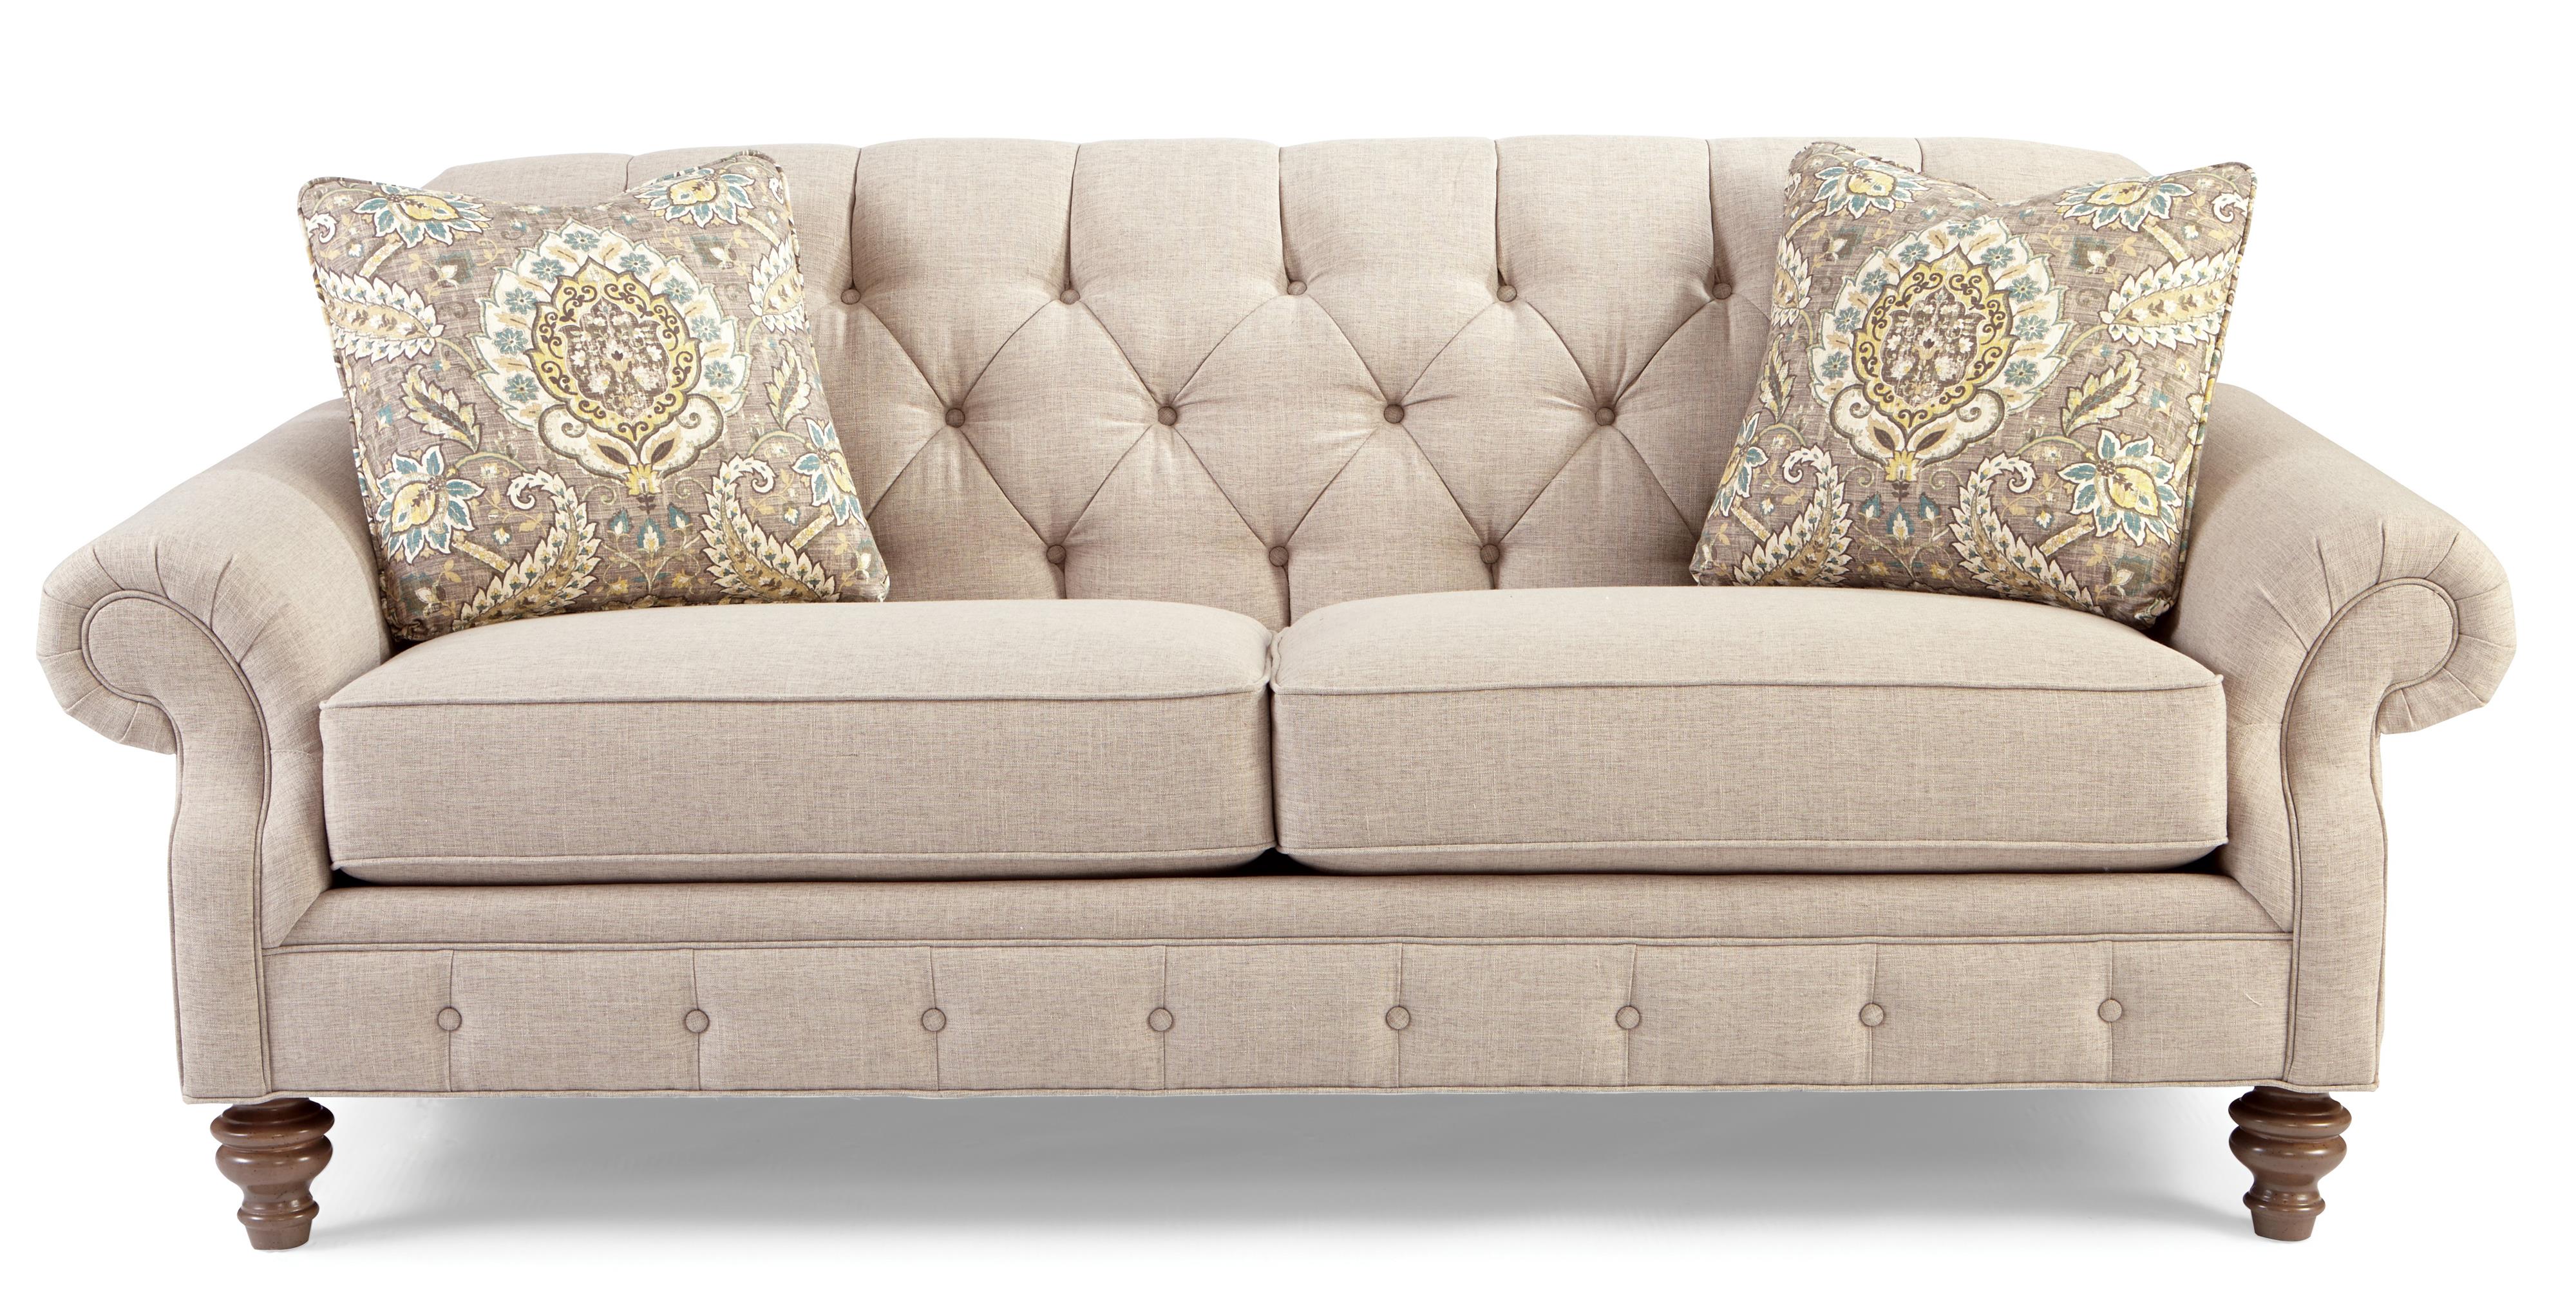 tufted sofas traditional button-tufted sofa with wide flared arms HTLEDBH